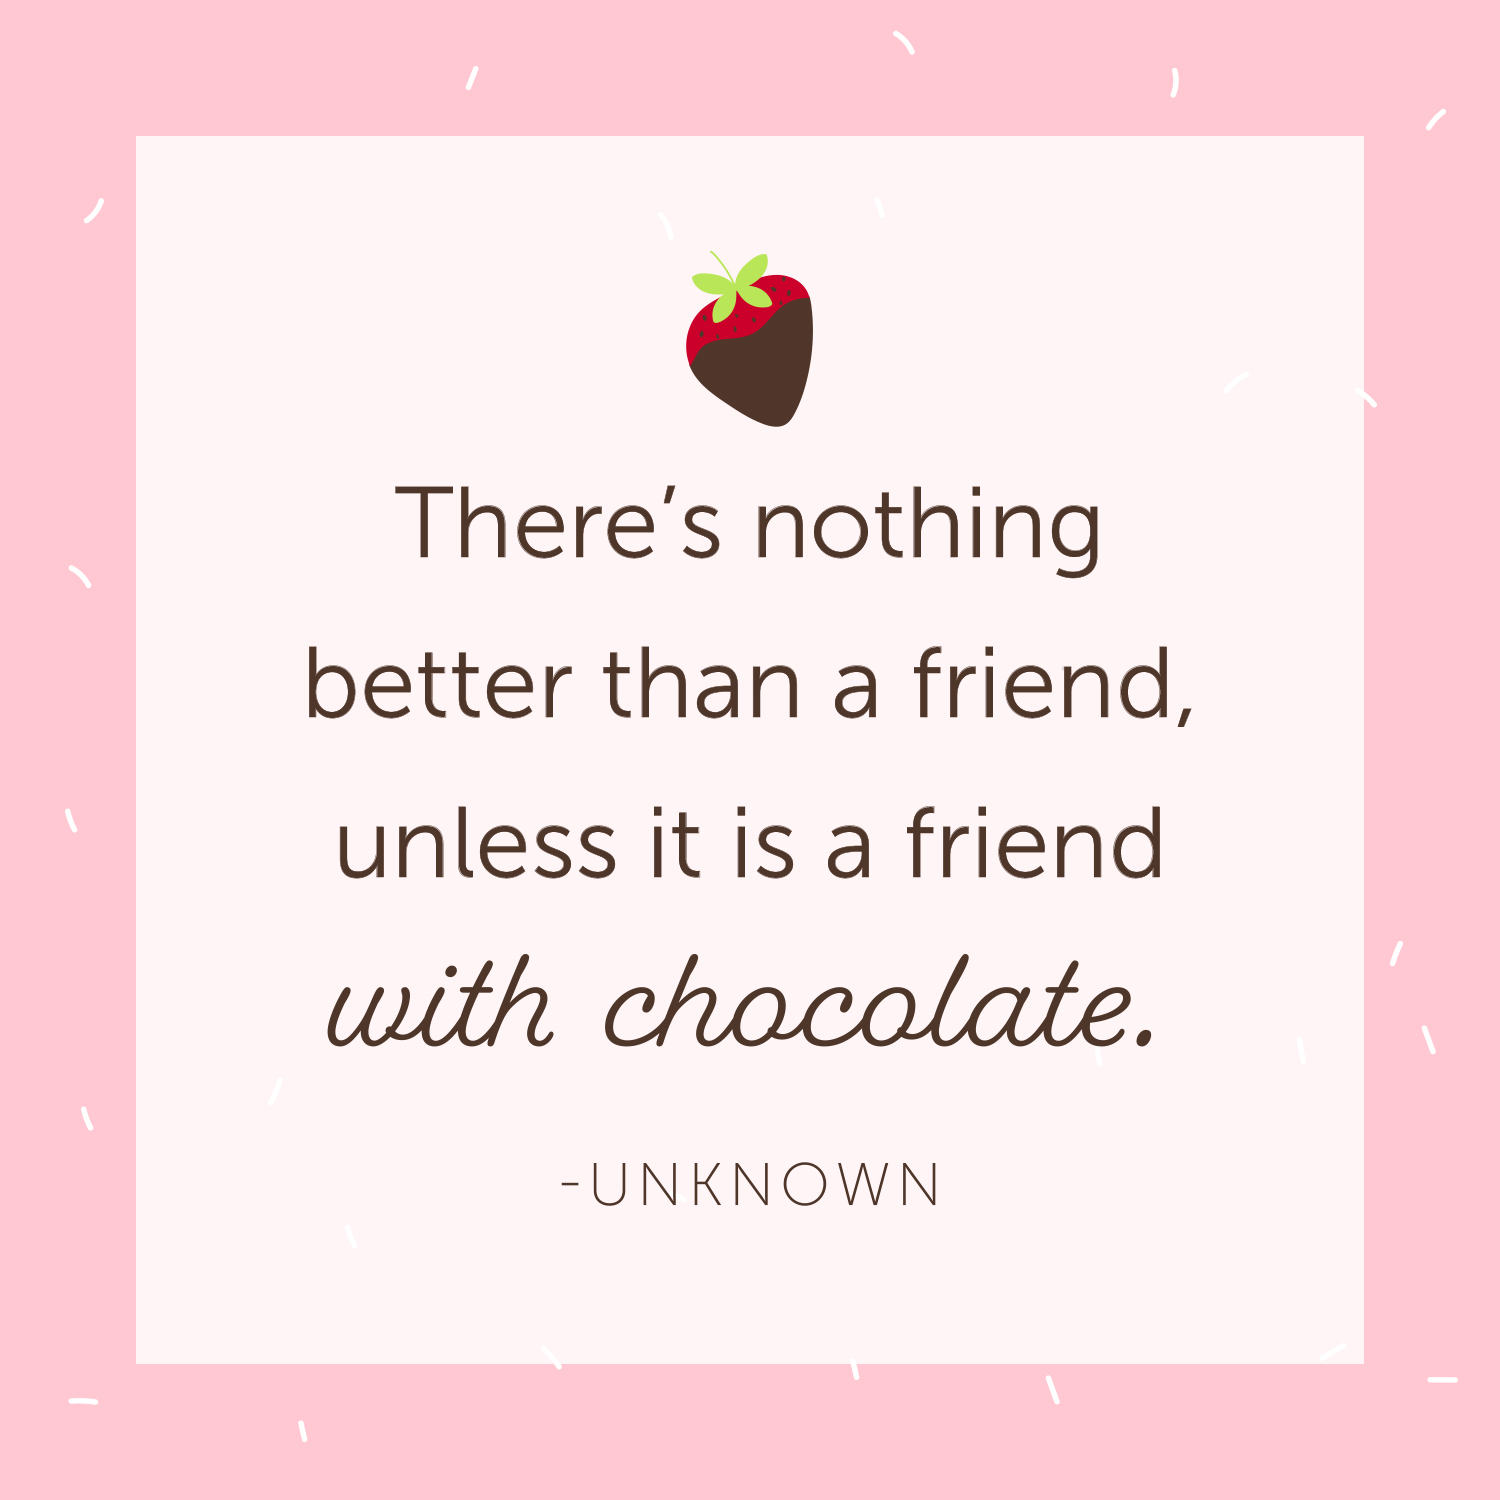 50+ Friendship Quotes to Share With Your BFF  Shari's Berries